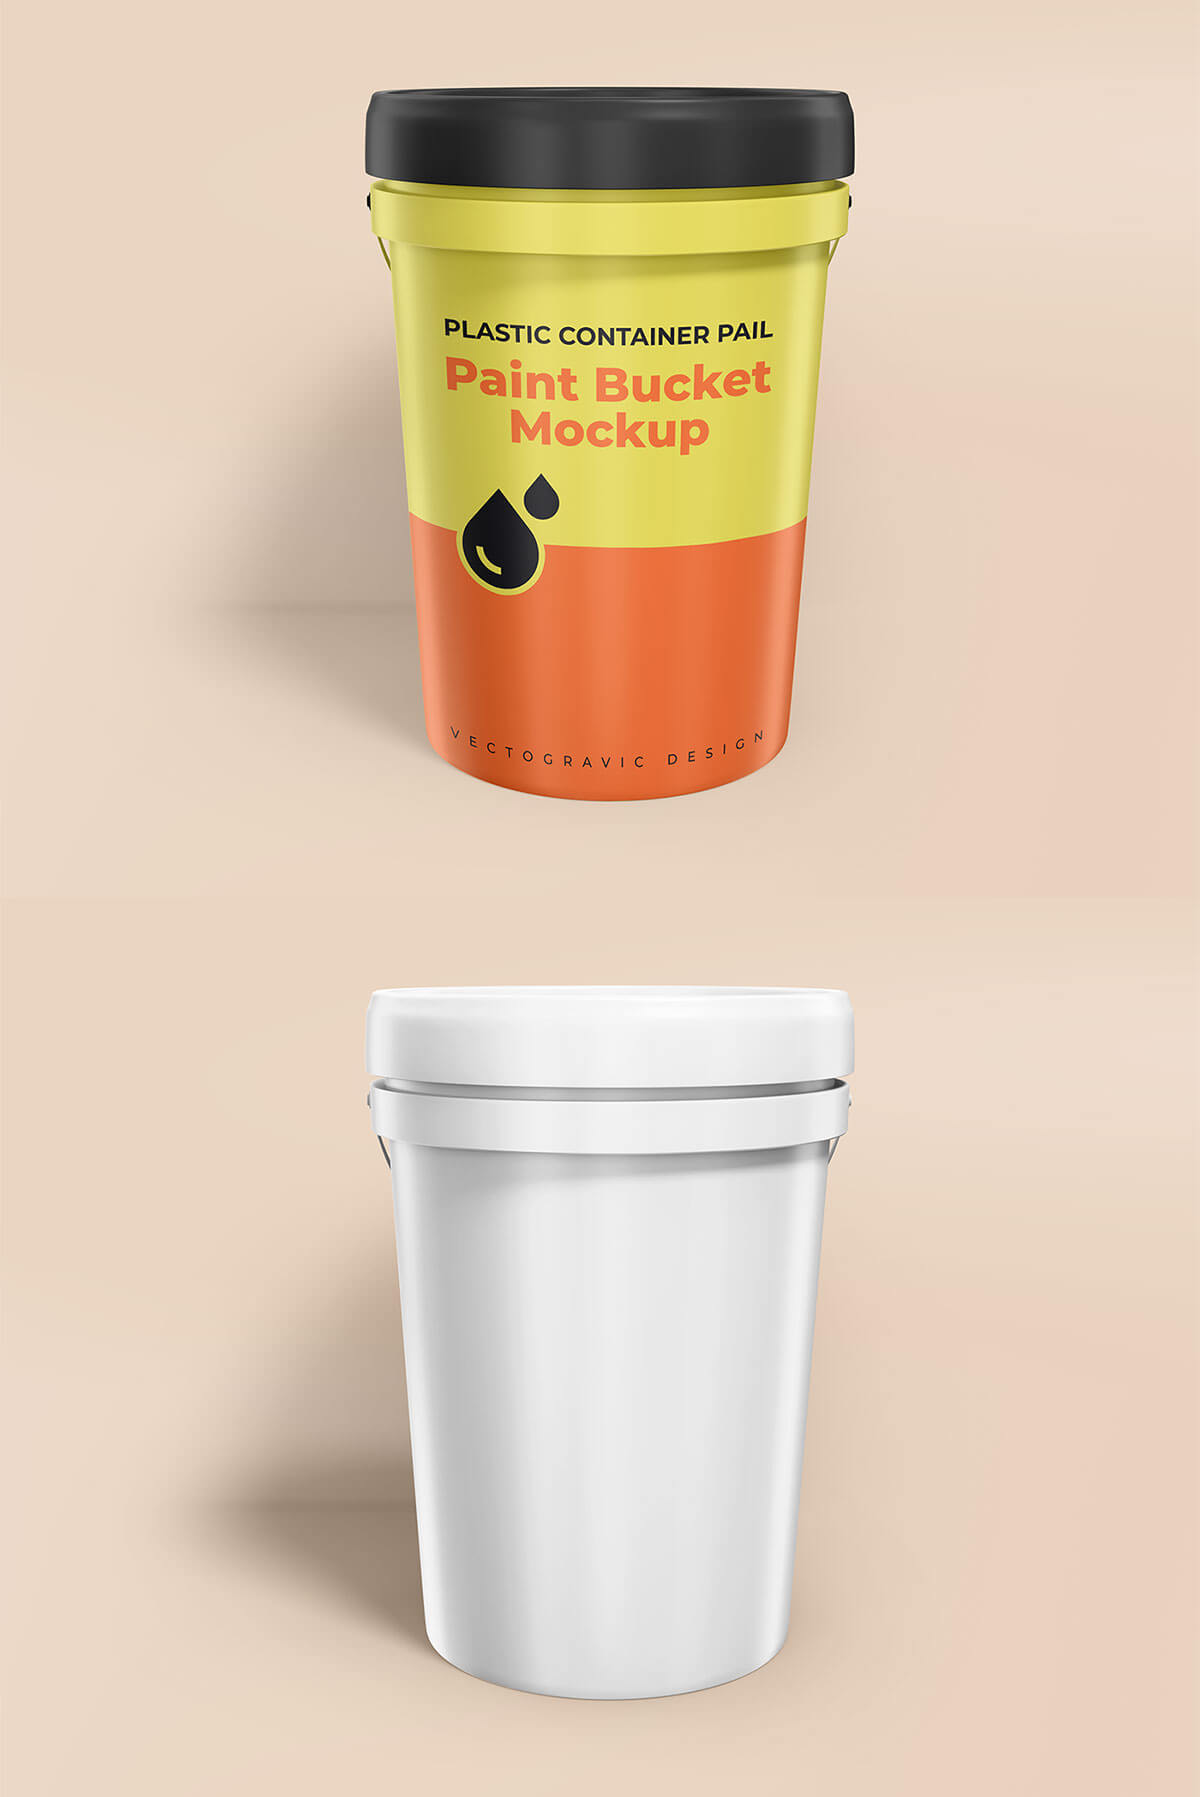 Plastic Container Gallon Paint Pail Mockup Free Download